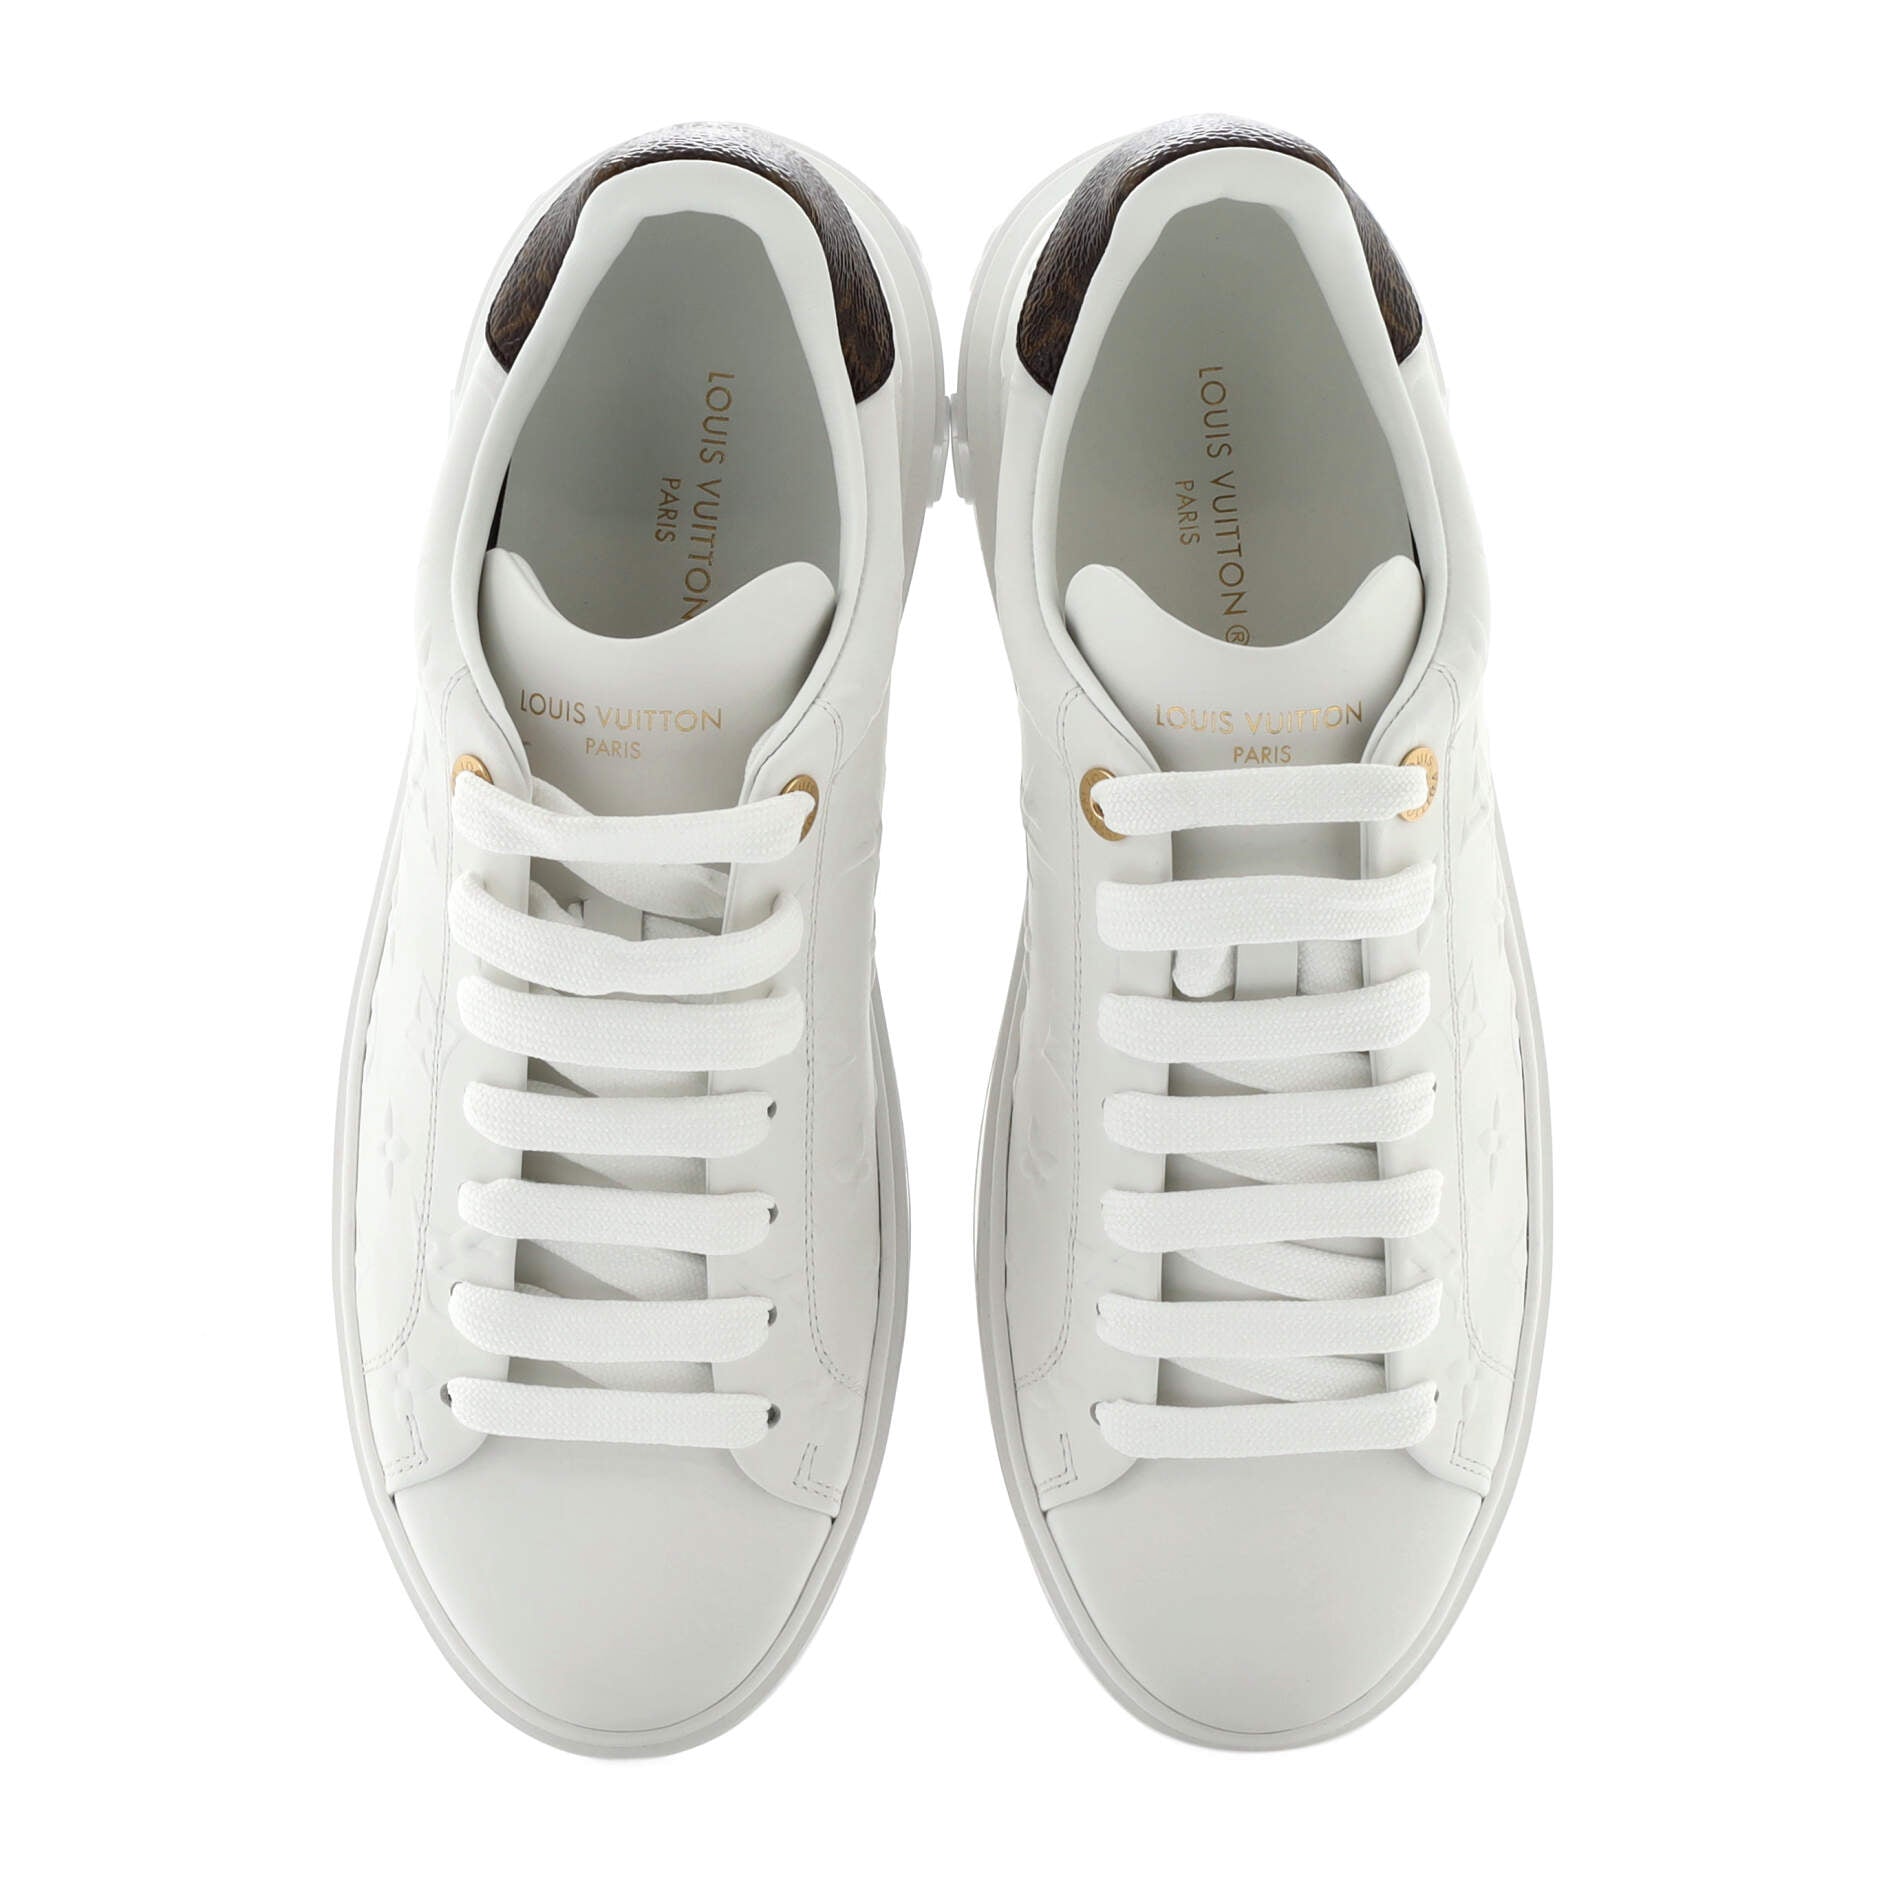 Louis Vuitton, Shoes, Louis Vuitton Womens Time Out Sneakers Monogram  Print Leather White